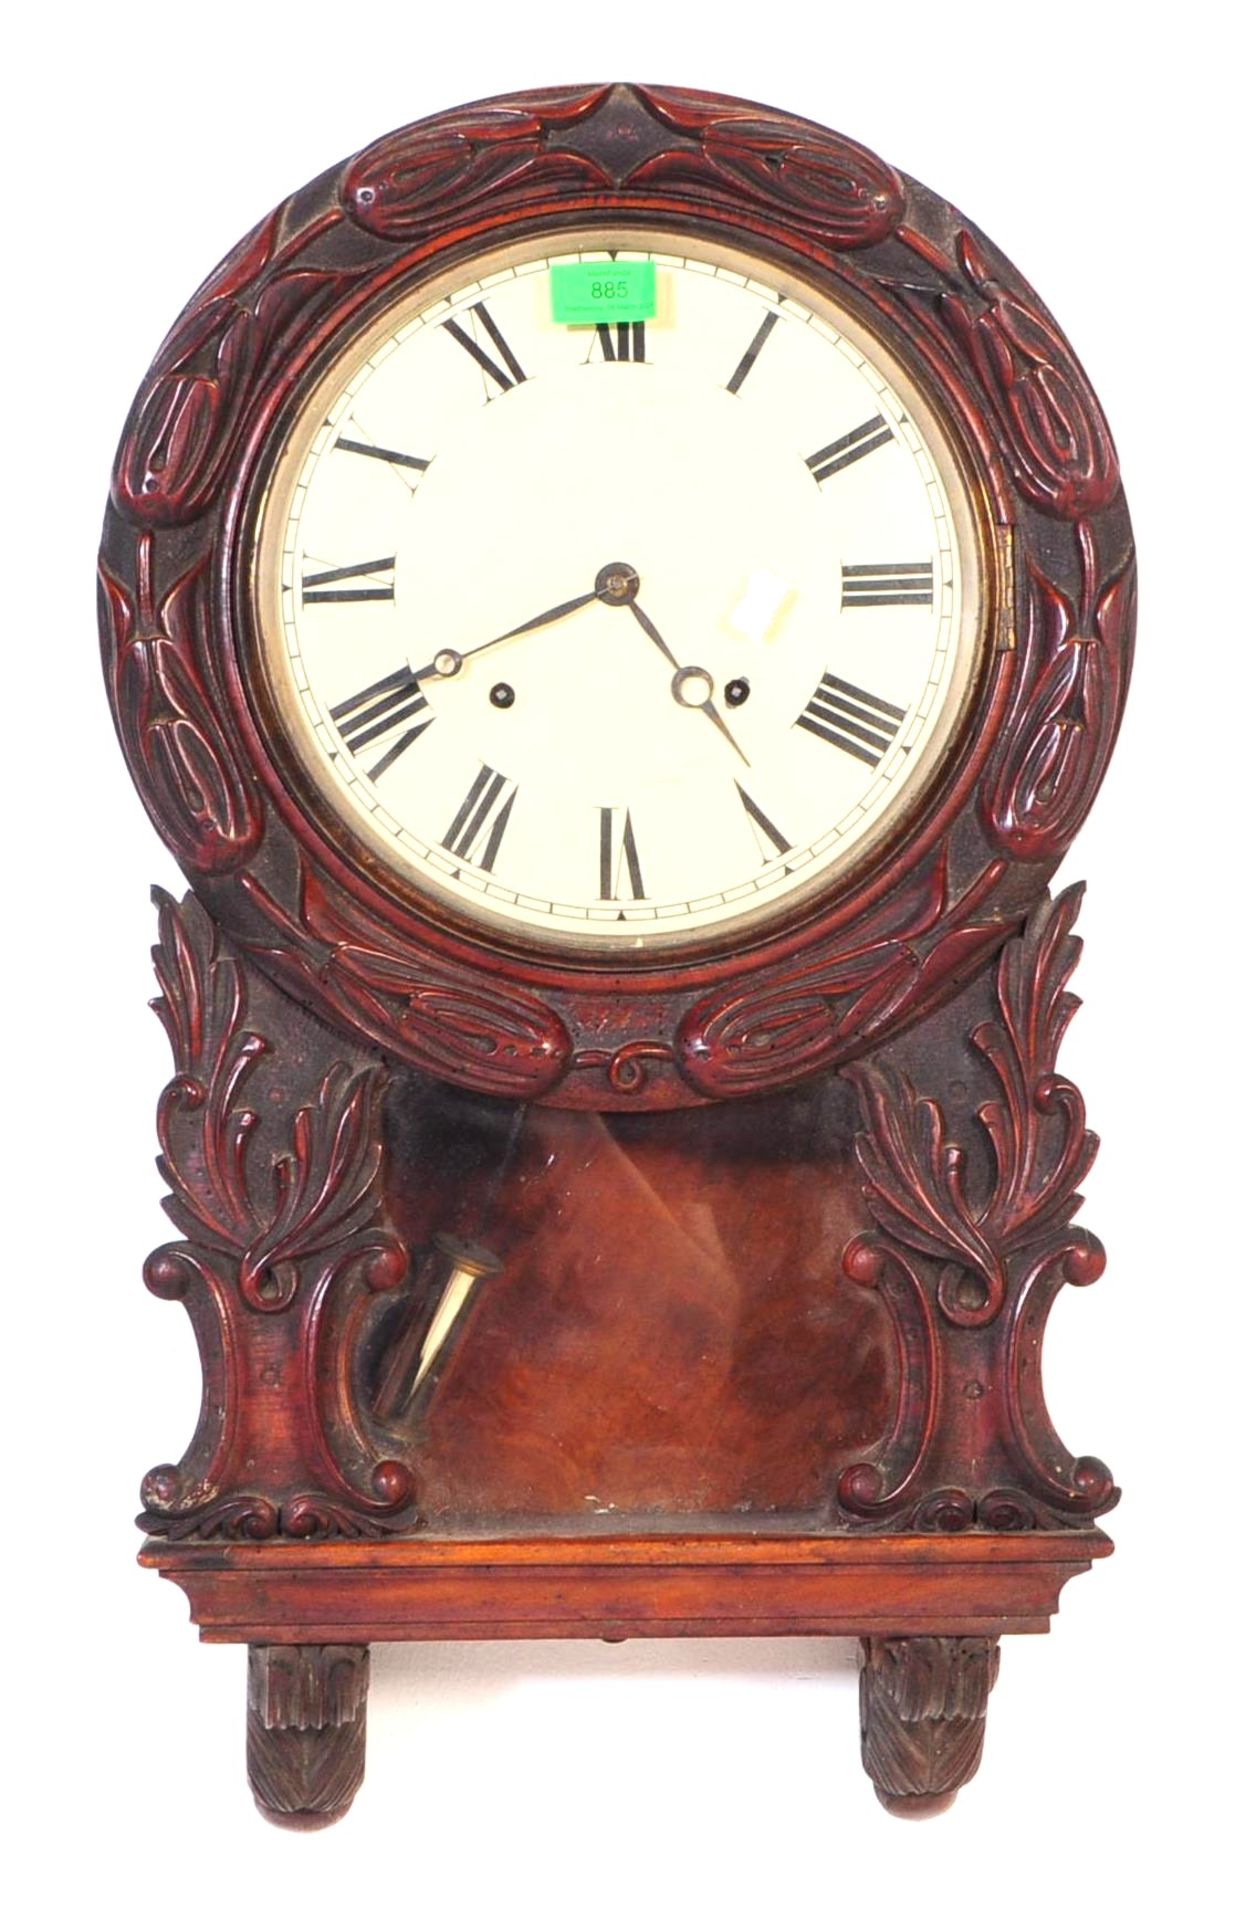 19TH CENTURY VICTORIAN 8-DAY ENGLISH DROP DIAL WALL CLOCK - Image 2 of 12